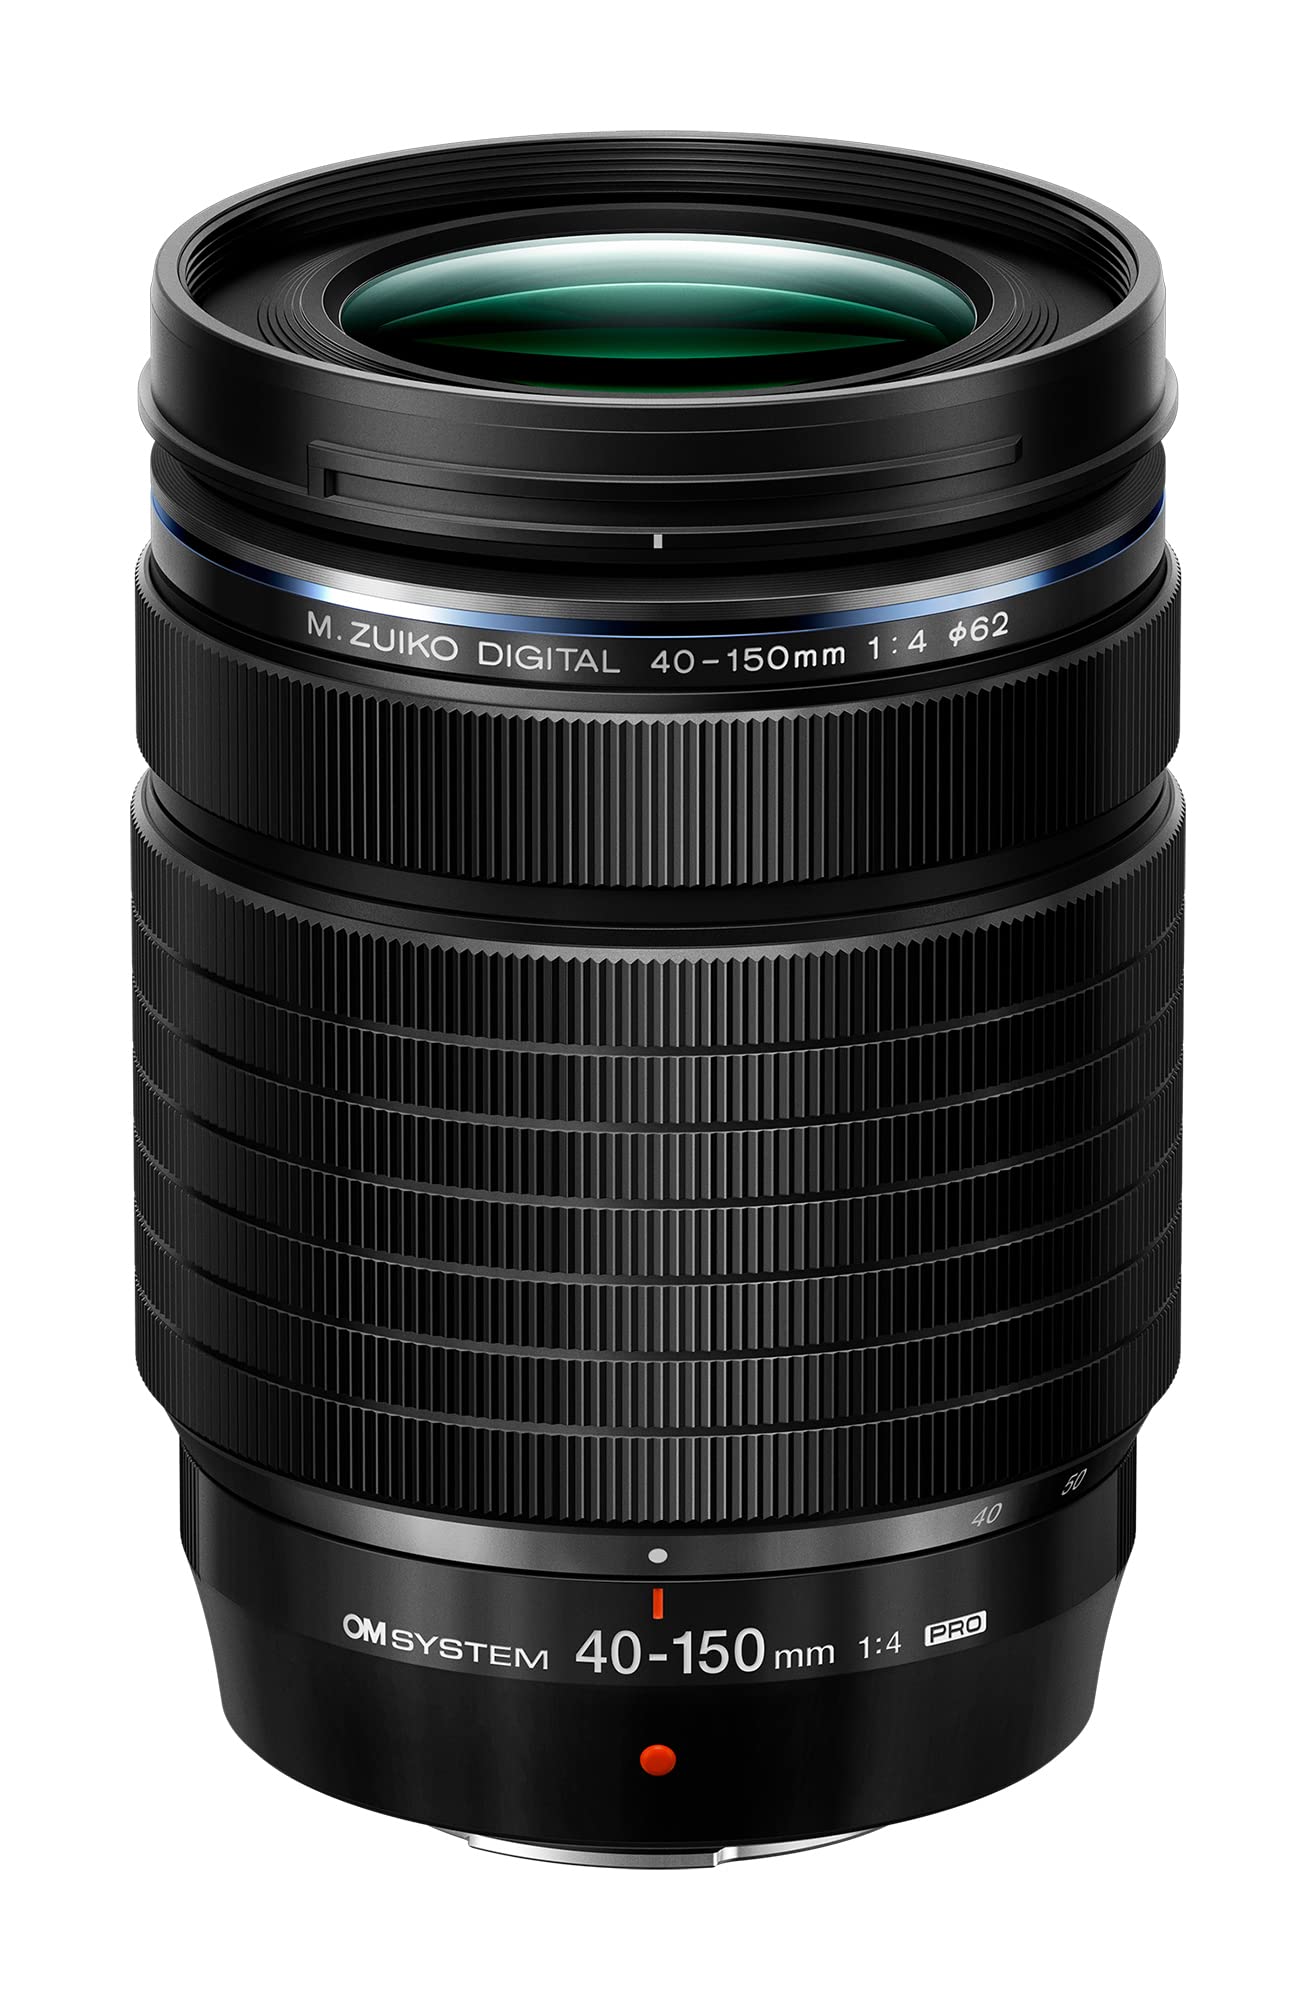 Olympus OM System M.Zuiko Digital ED 40-150mm F4.0 PRO for Micro Four Thirds System Camera Compact Powerful Zoom Weather Sealed Design Fluorine Coating